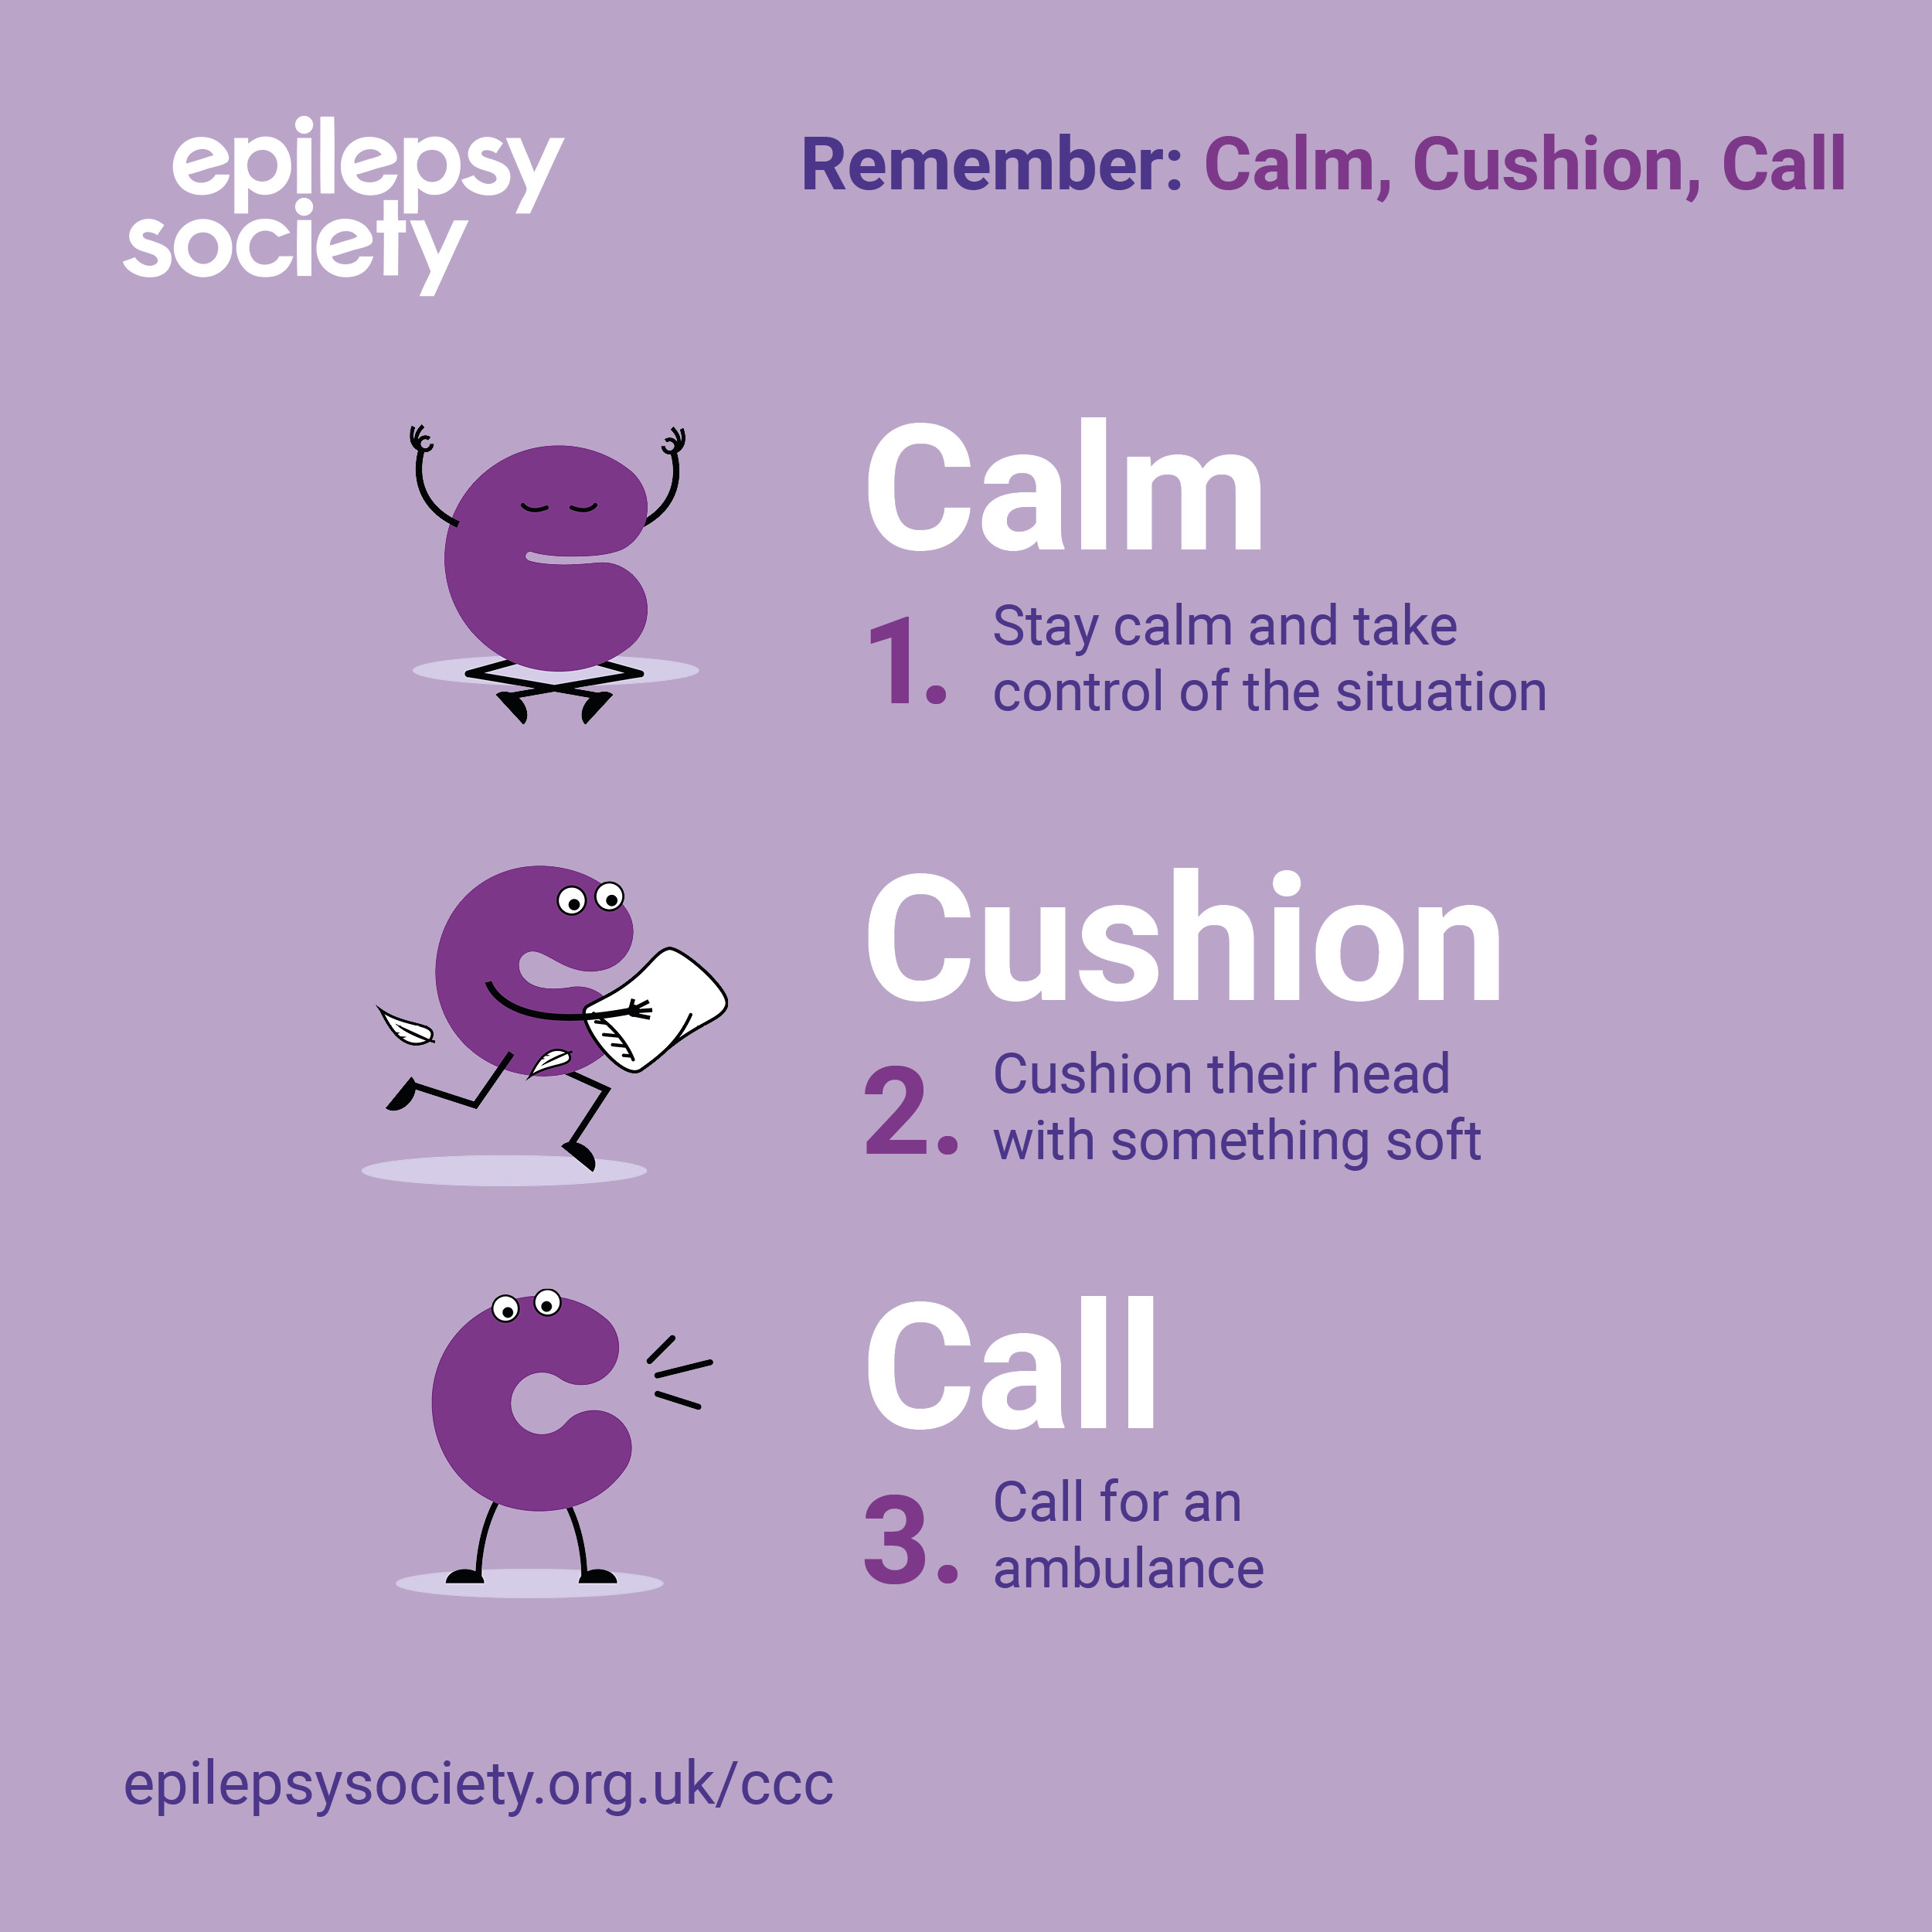 Infographic with purple background includes the simple message Calm, Cushion, Call, with each word accompanies by an animated C